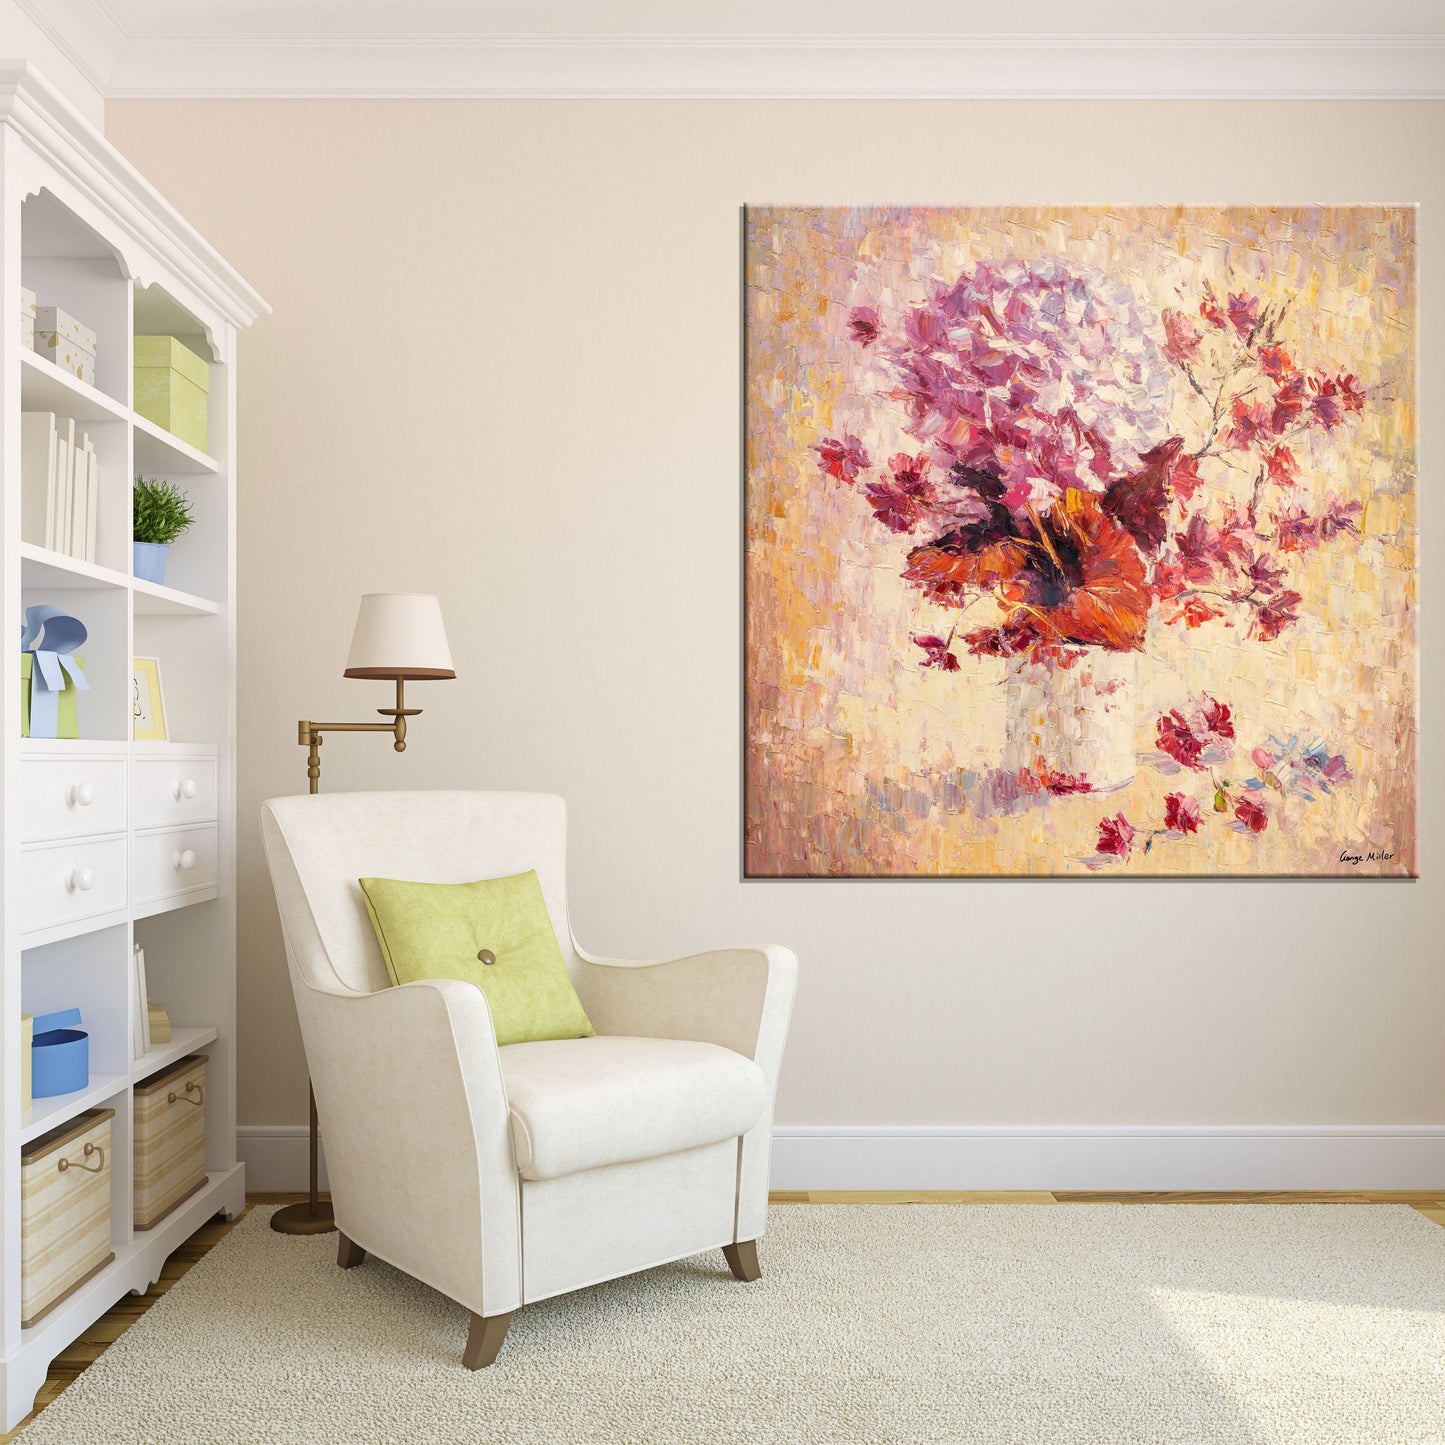 Flower Painting, Flower Art, Contemporary Painting, Oil Painting Abstract, Canvas Art, Wall Art Canvas, Oil Painting Original, Palette Knife